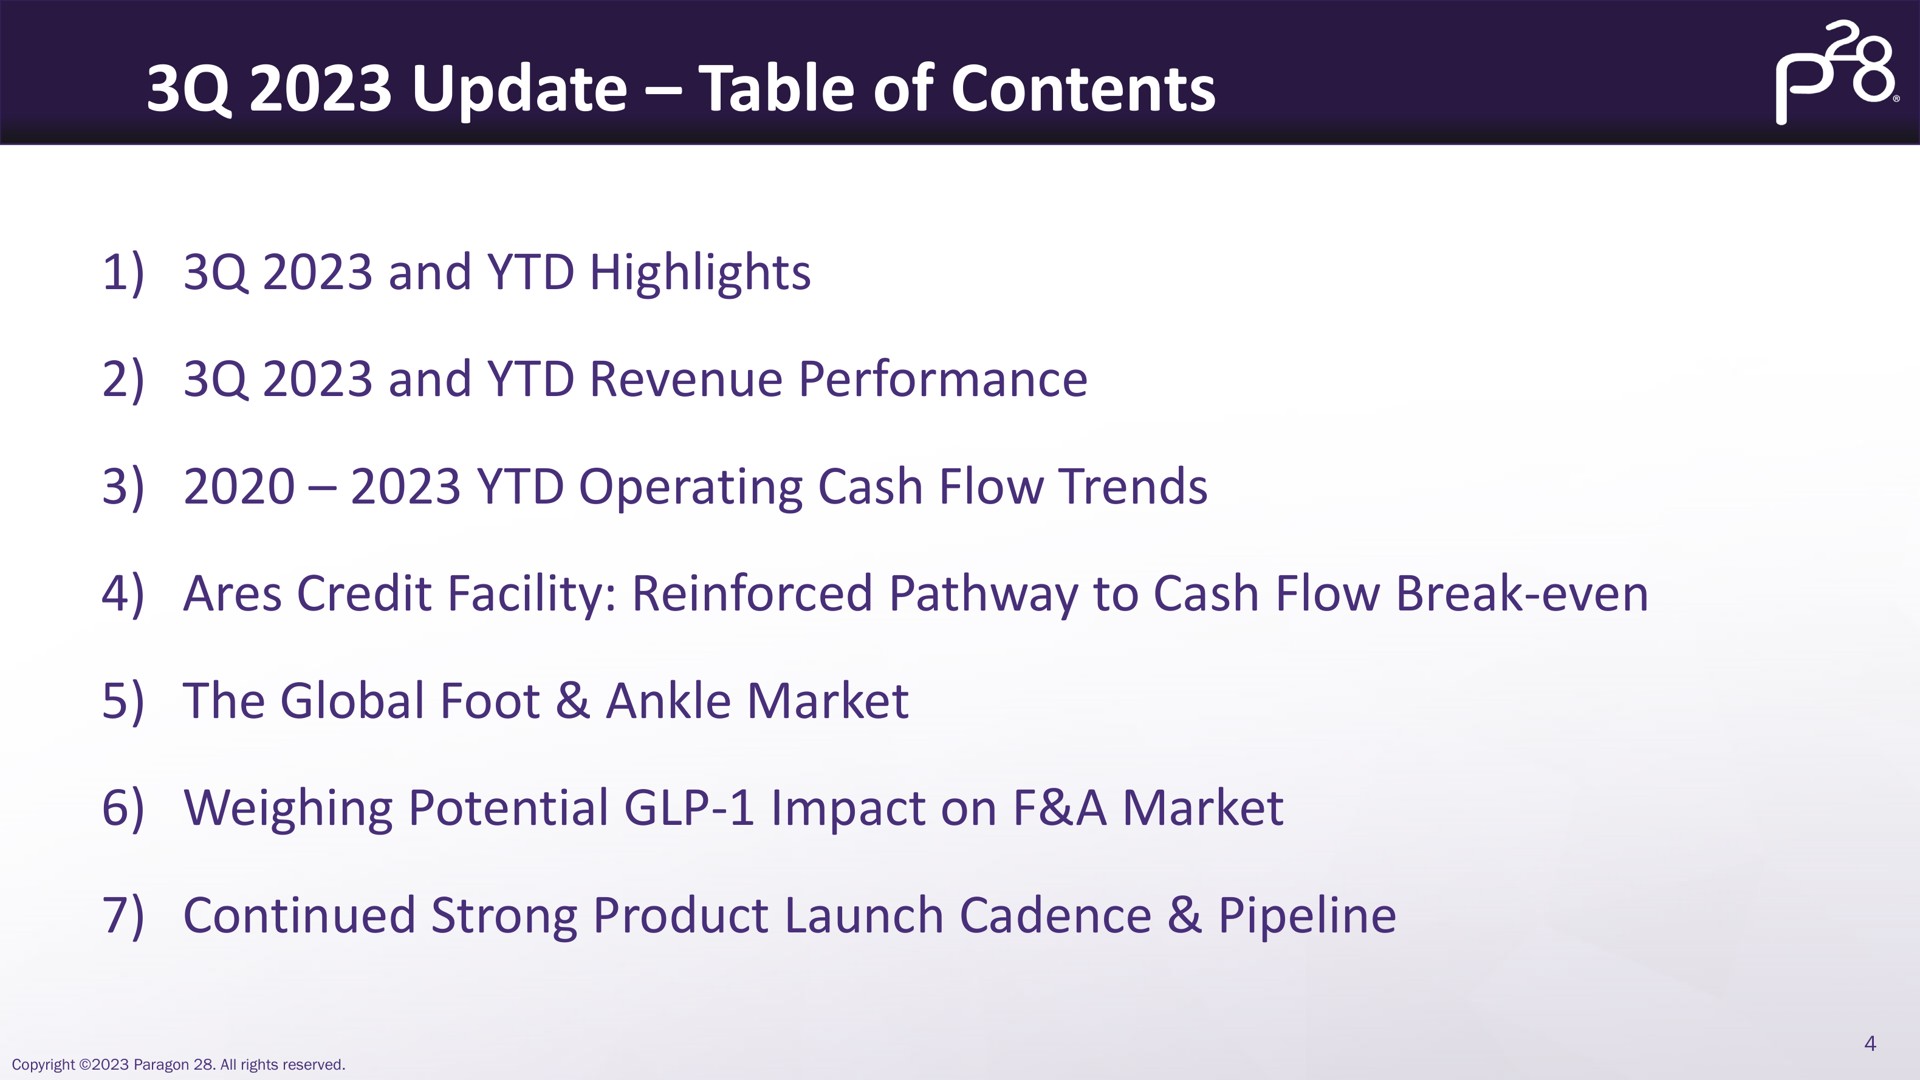 update table of contents and highlights and revenue performance operating cash flow trends ares credit facility reinforced pathway to cash flow break even the global foot ankle market weighing potential impact on a market continued strong product launch cadence pipeline | Paragon28